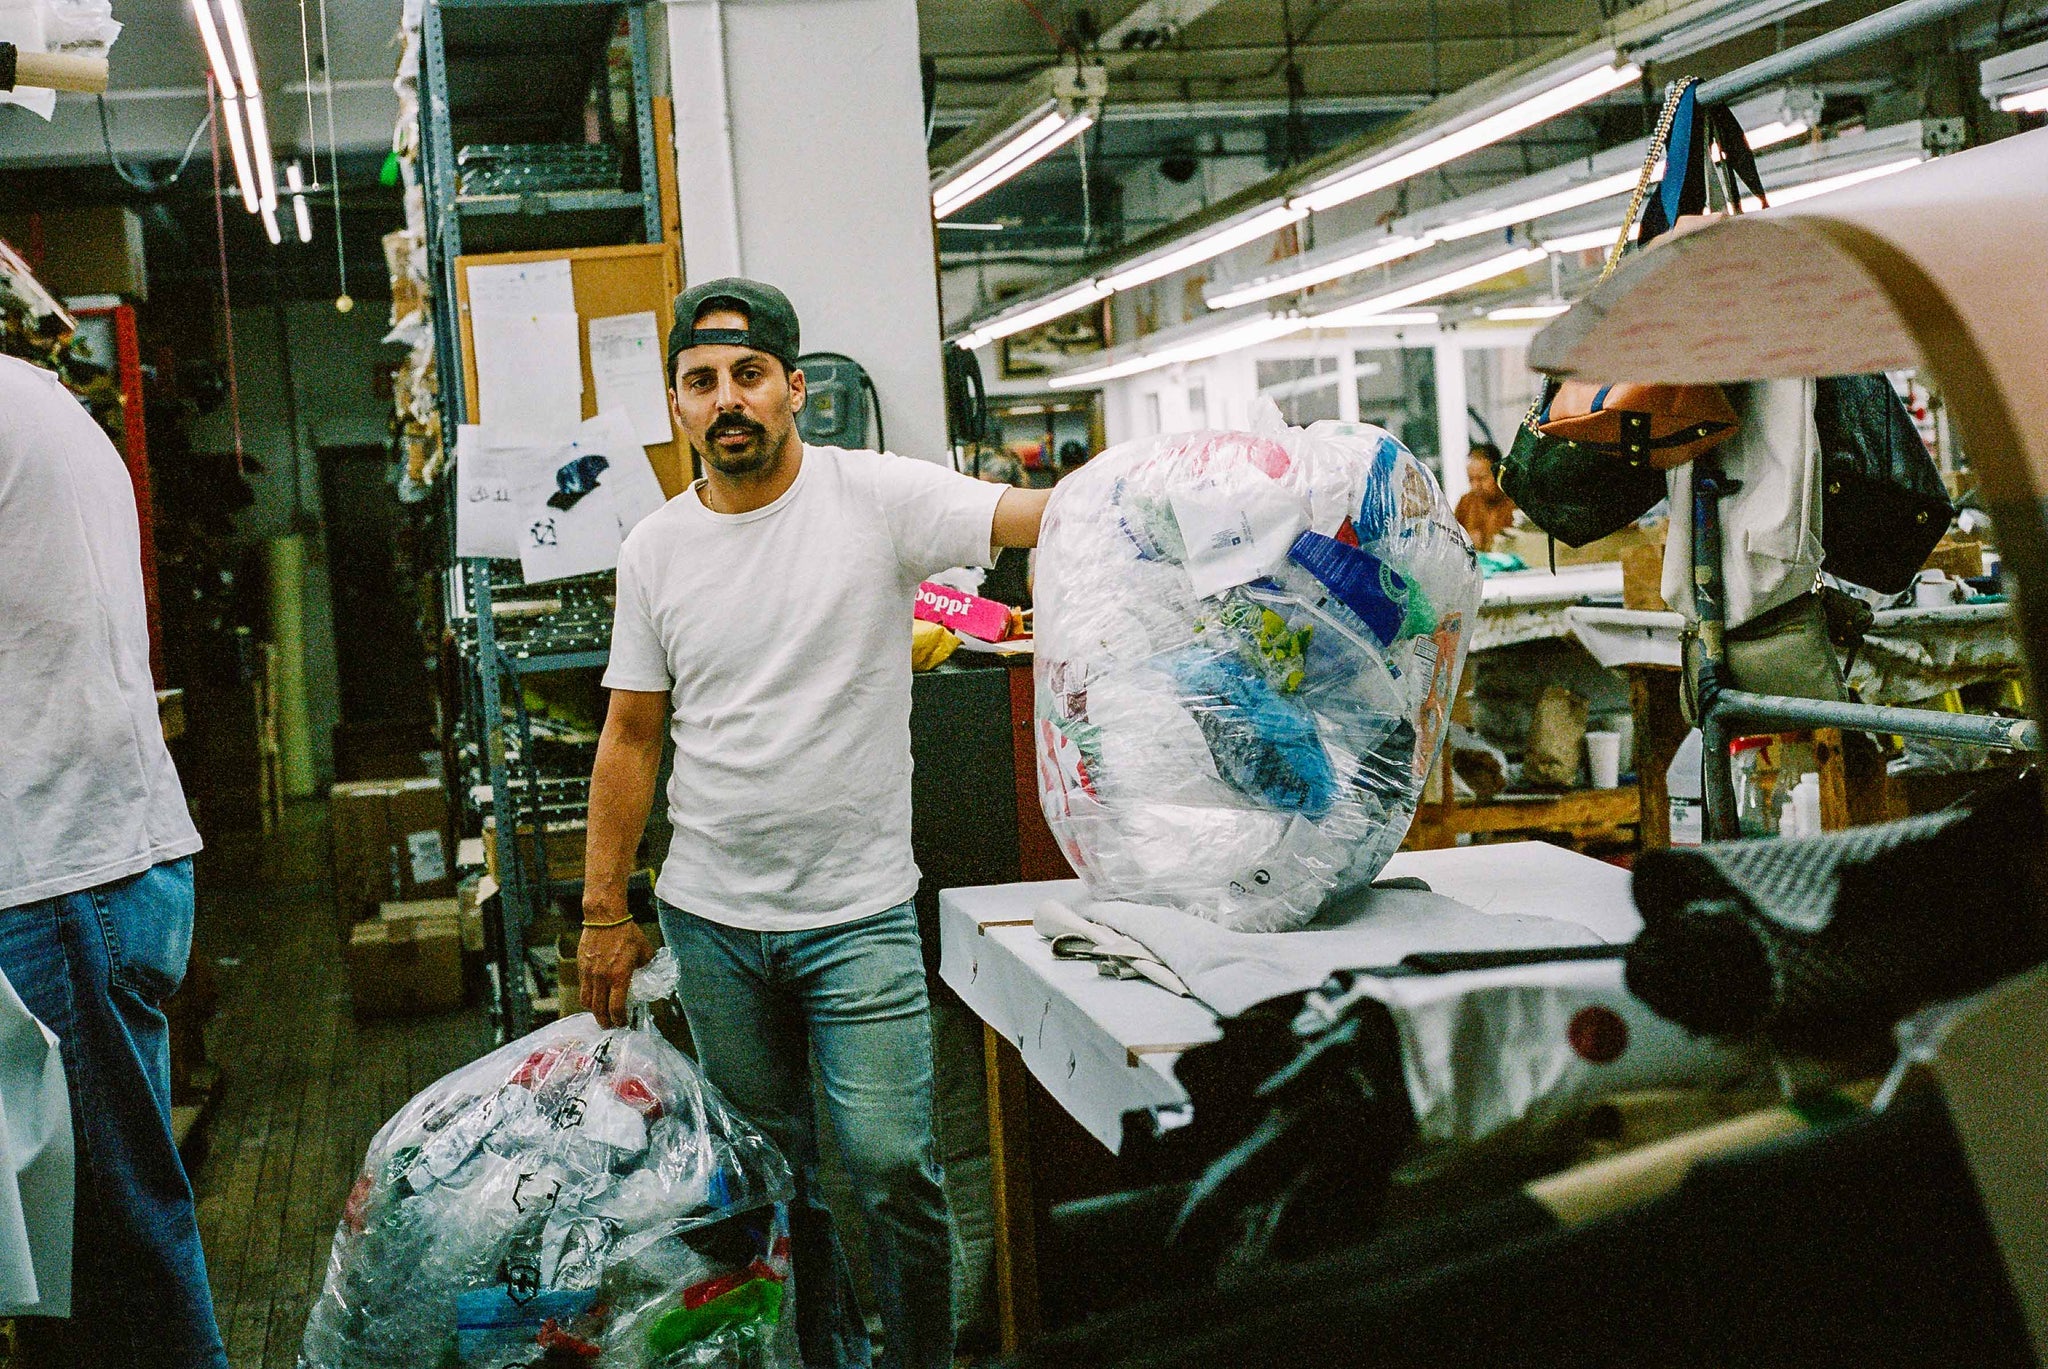 ON A MISSION TO REIMAGINE WASTE.